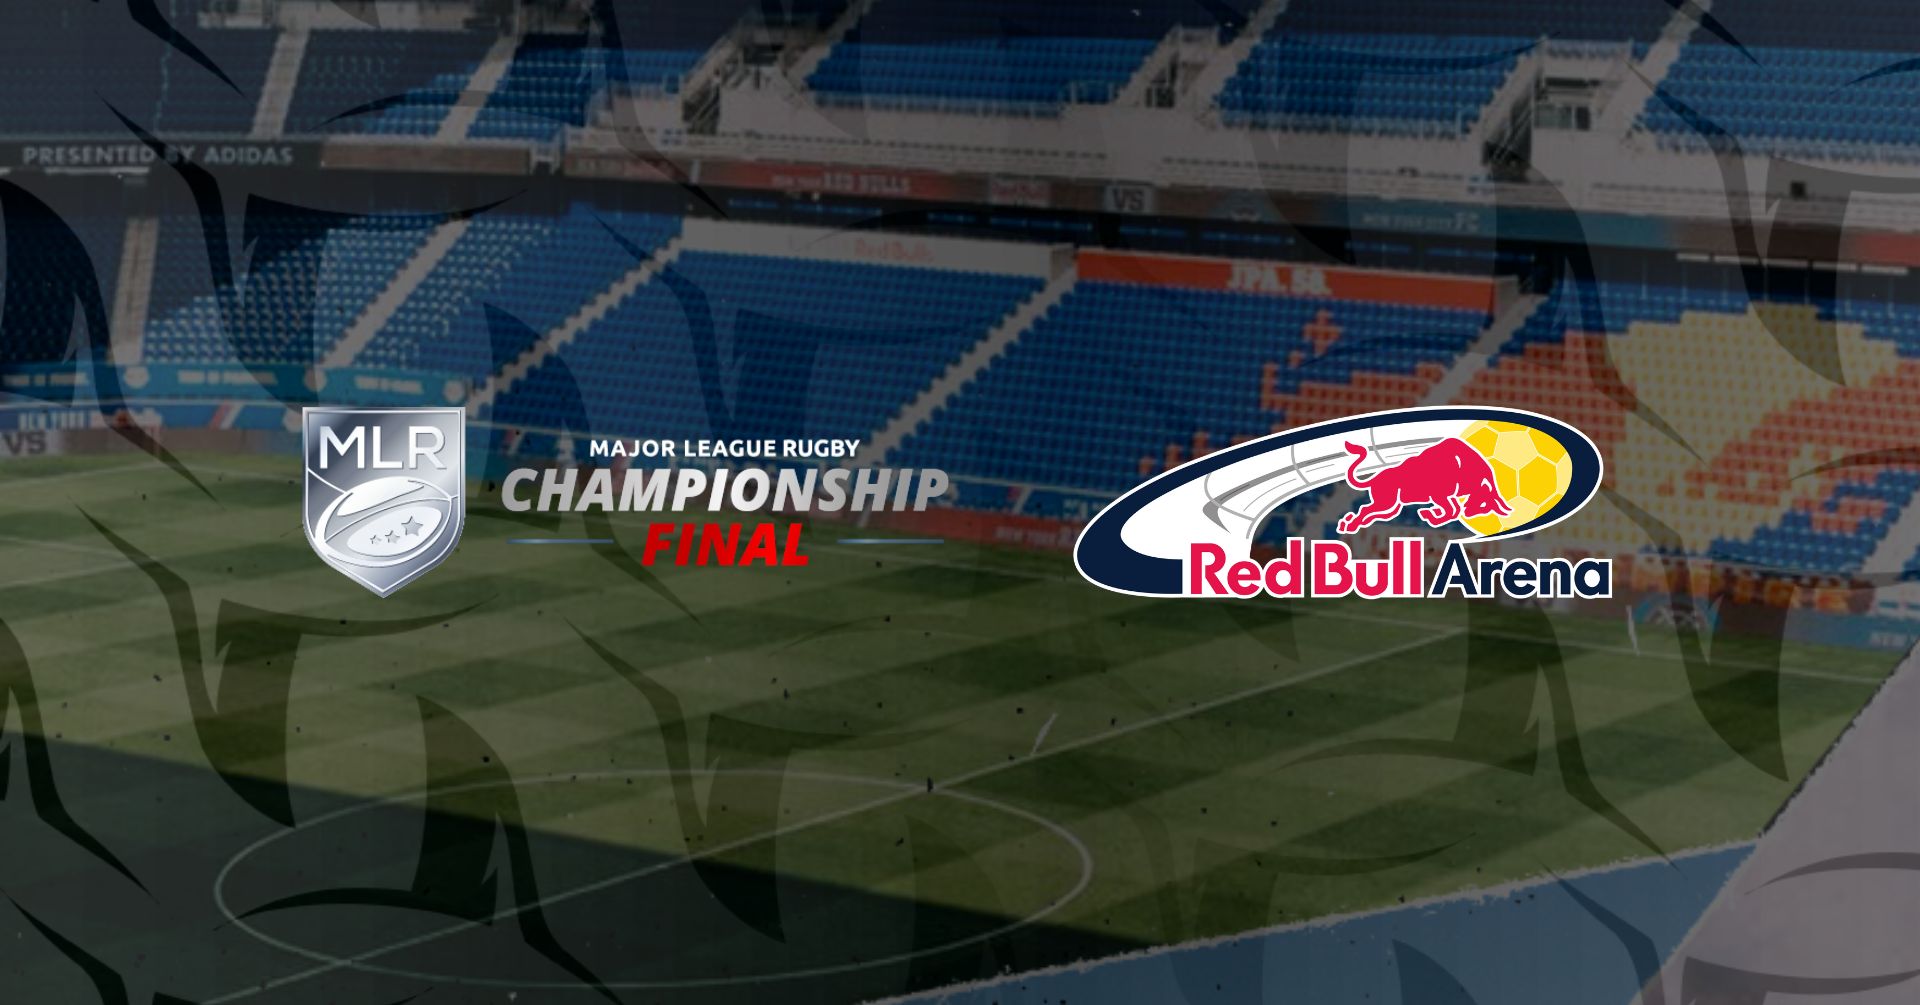 Seawolves Head to Third Championship Match in Five Seasons, 2022 Final at Red Bull Arena